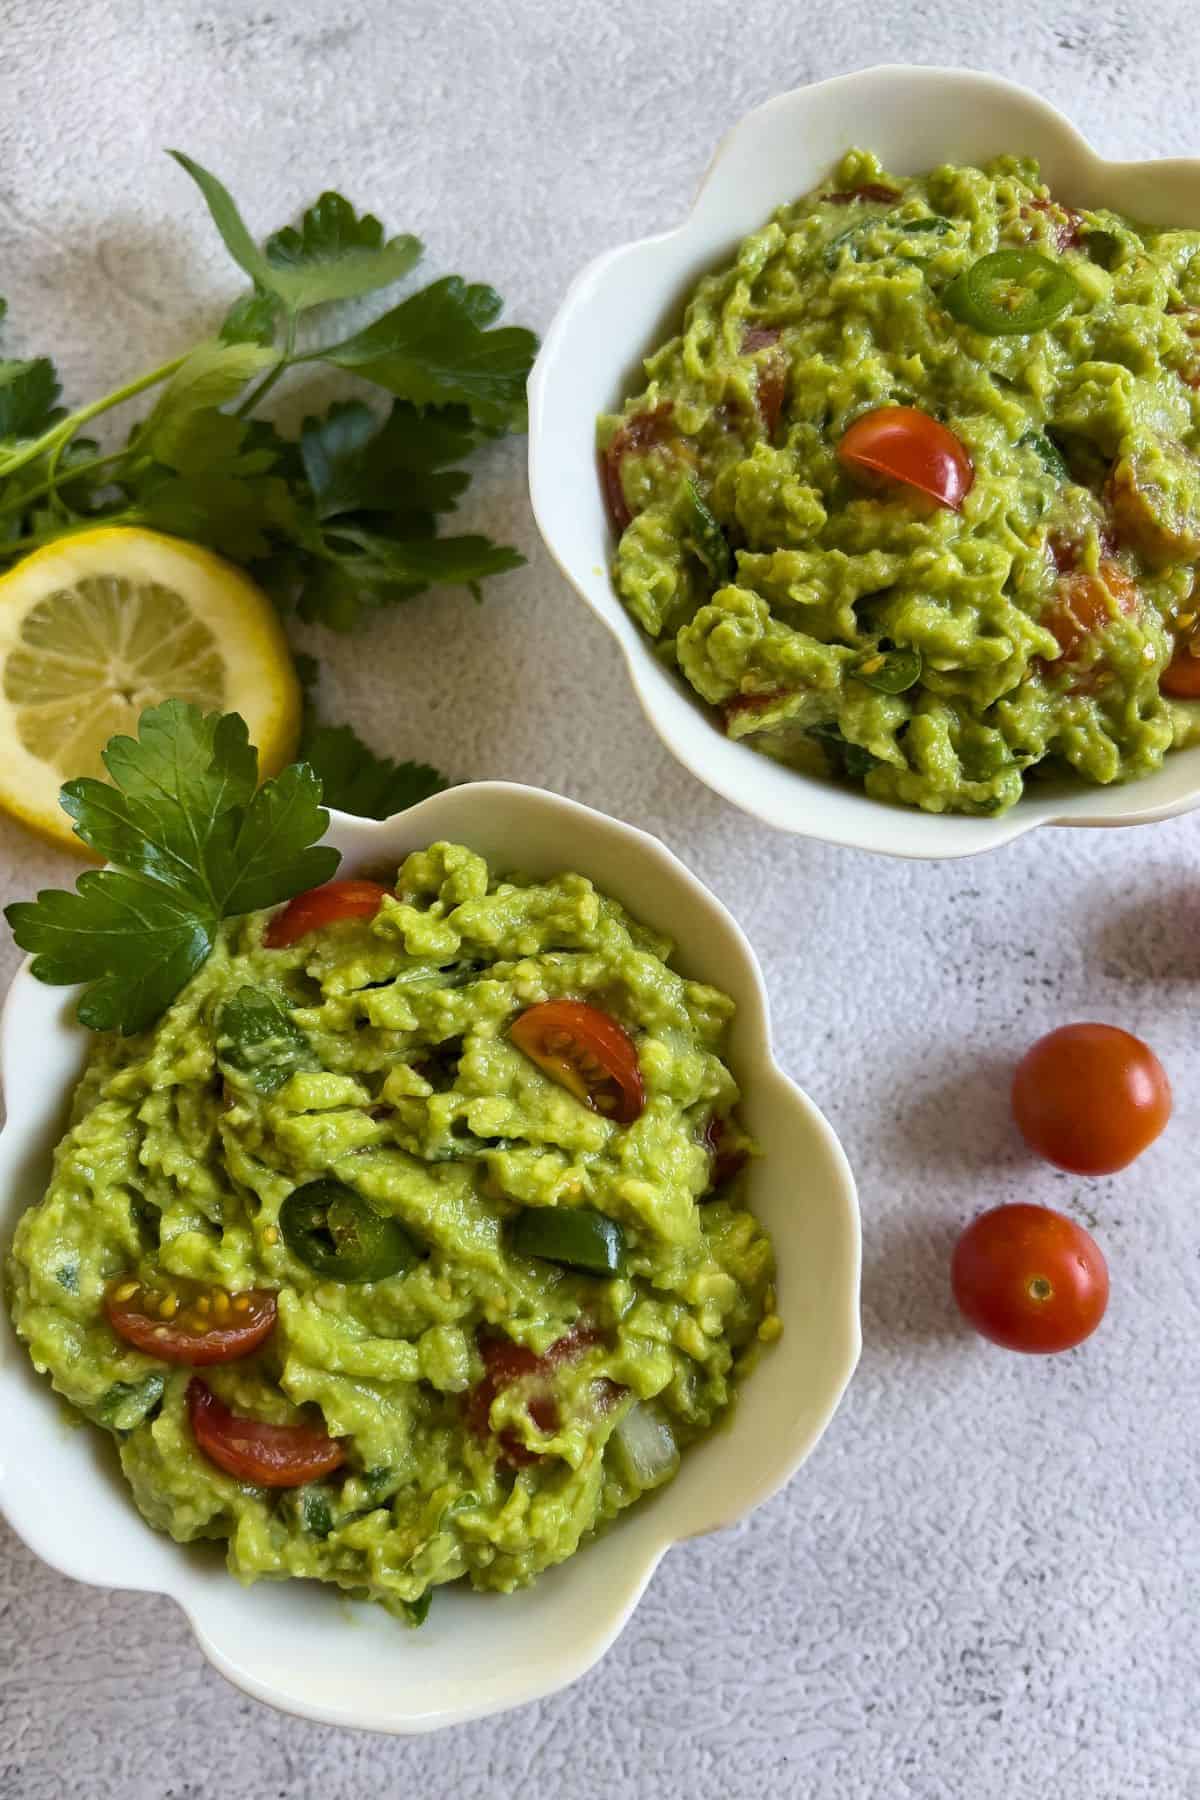 Guacamole bowls on the table.